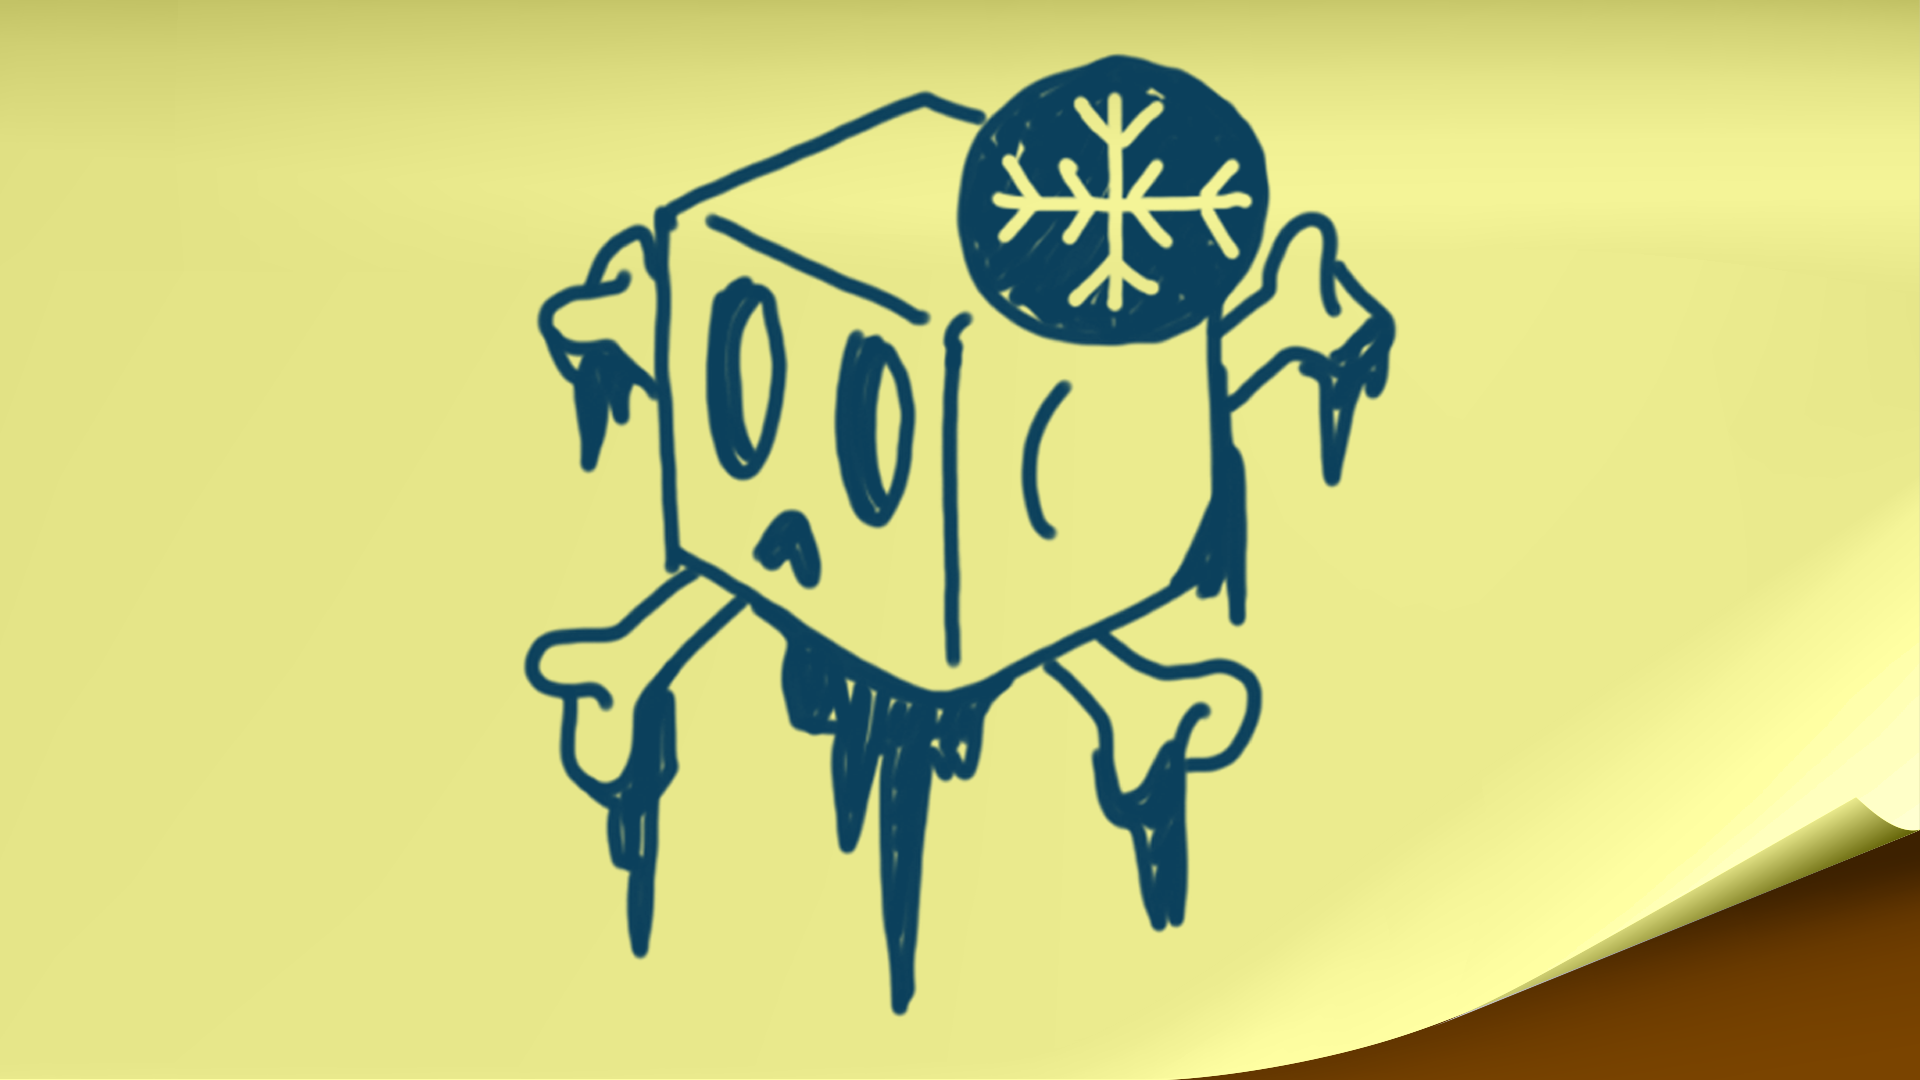 Icon for Freeze to death